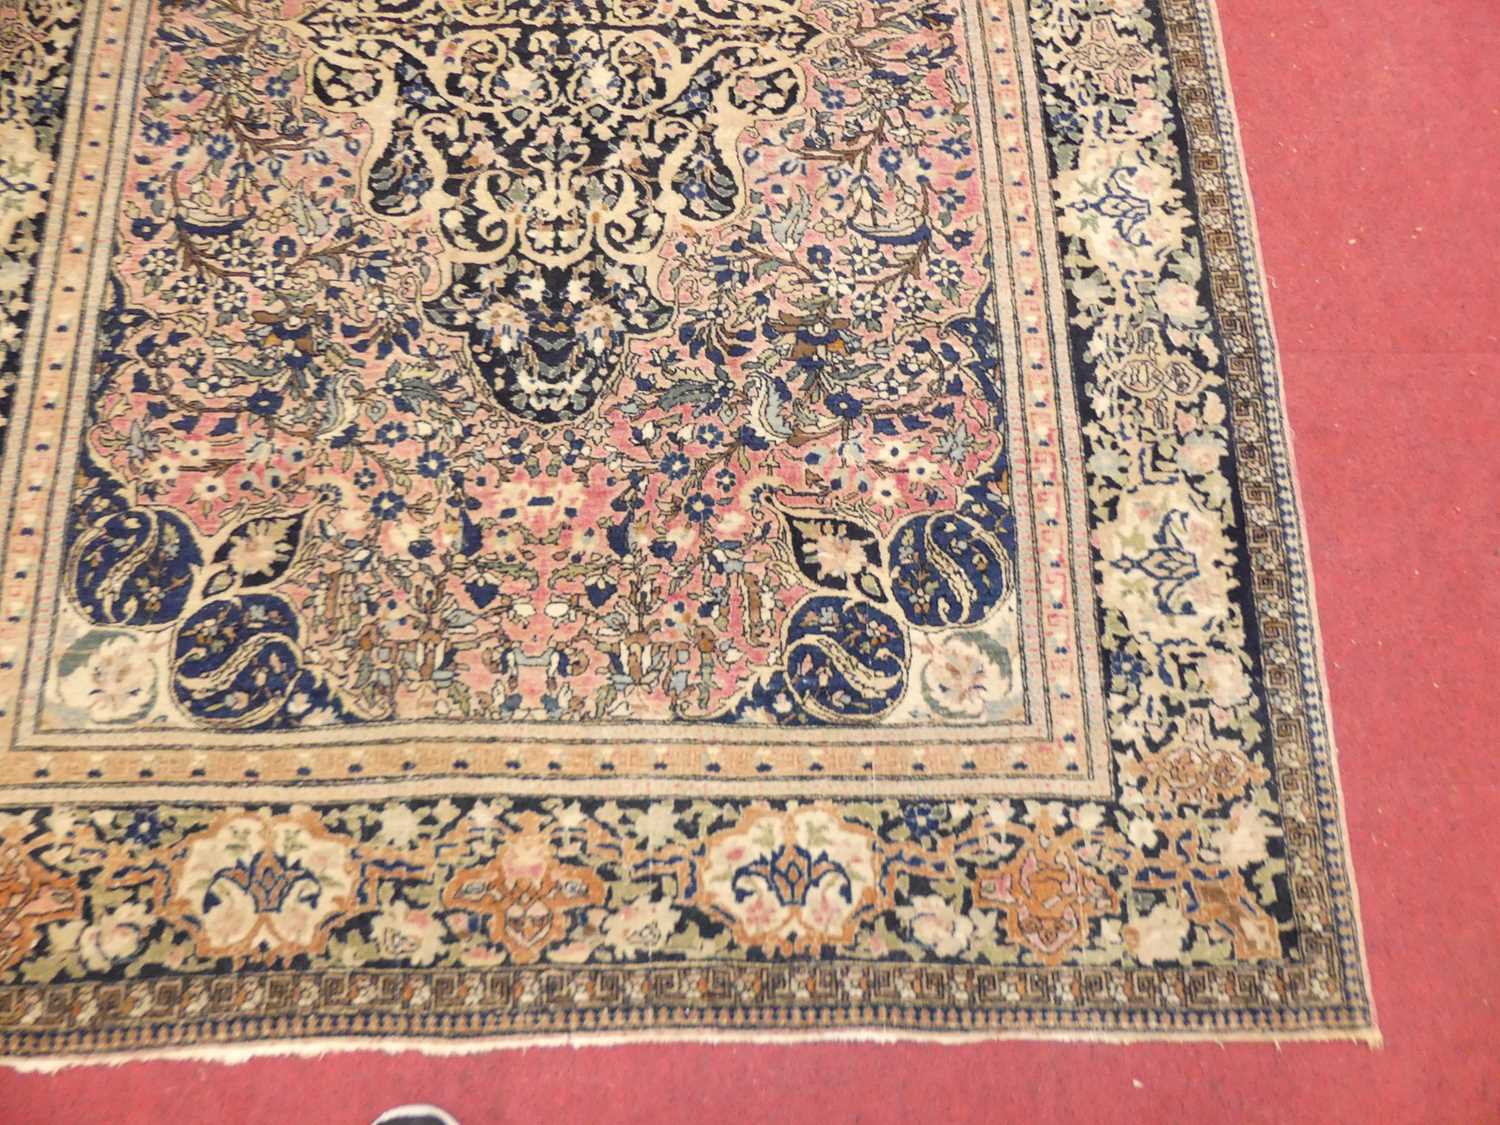 A Persian woollen red & cream ground Nain rug, 205 x 141cm - Image 2 of 2